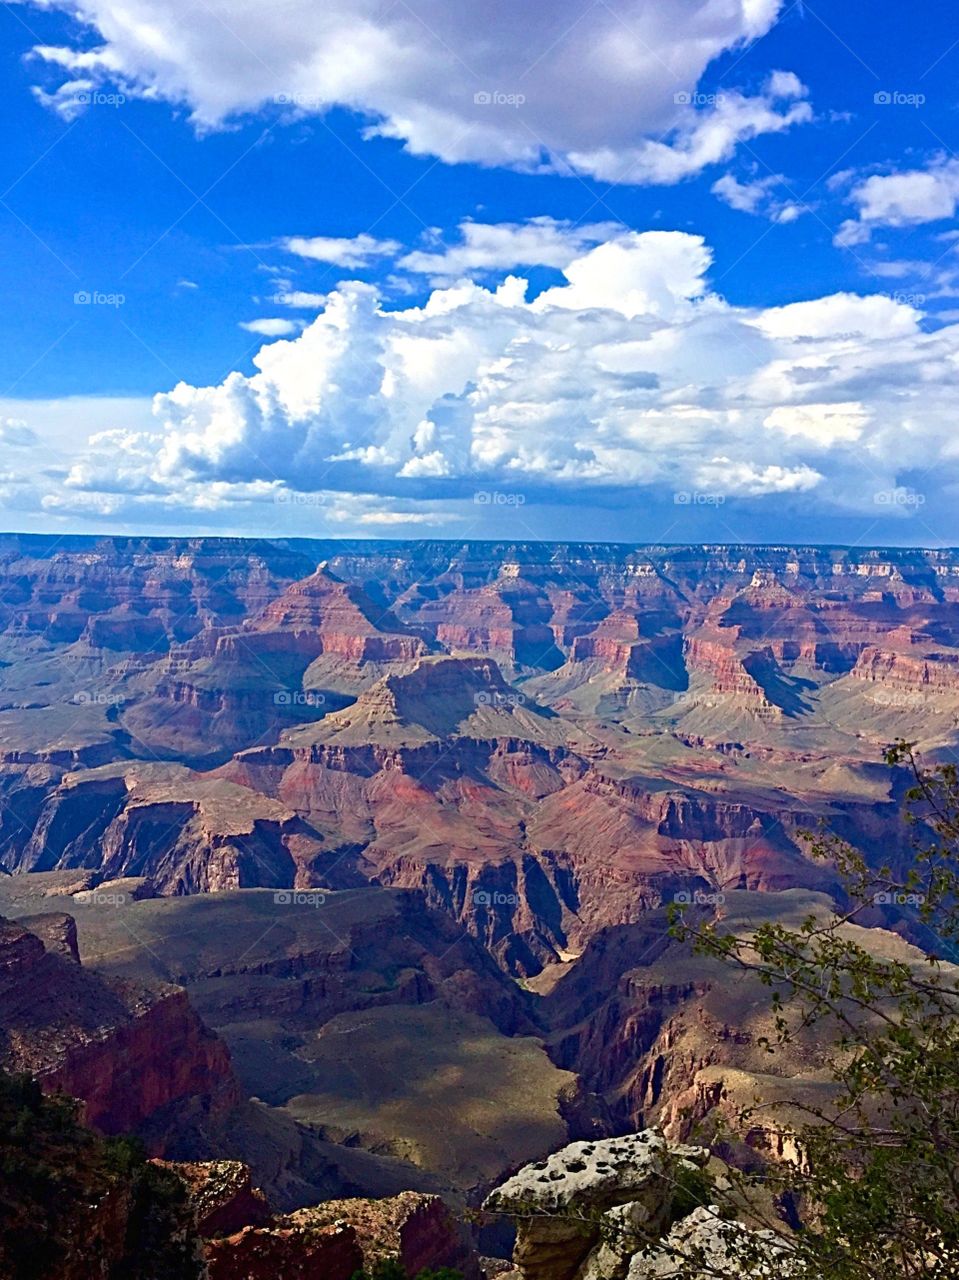 The grandness of It all. Grand Canyon 